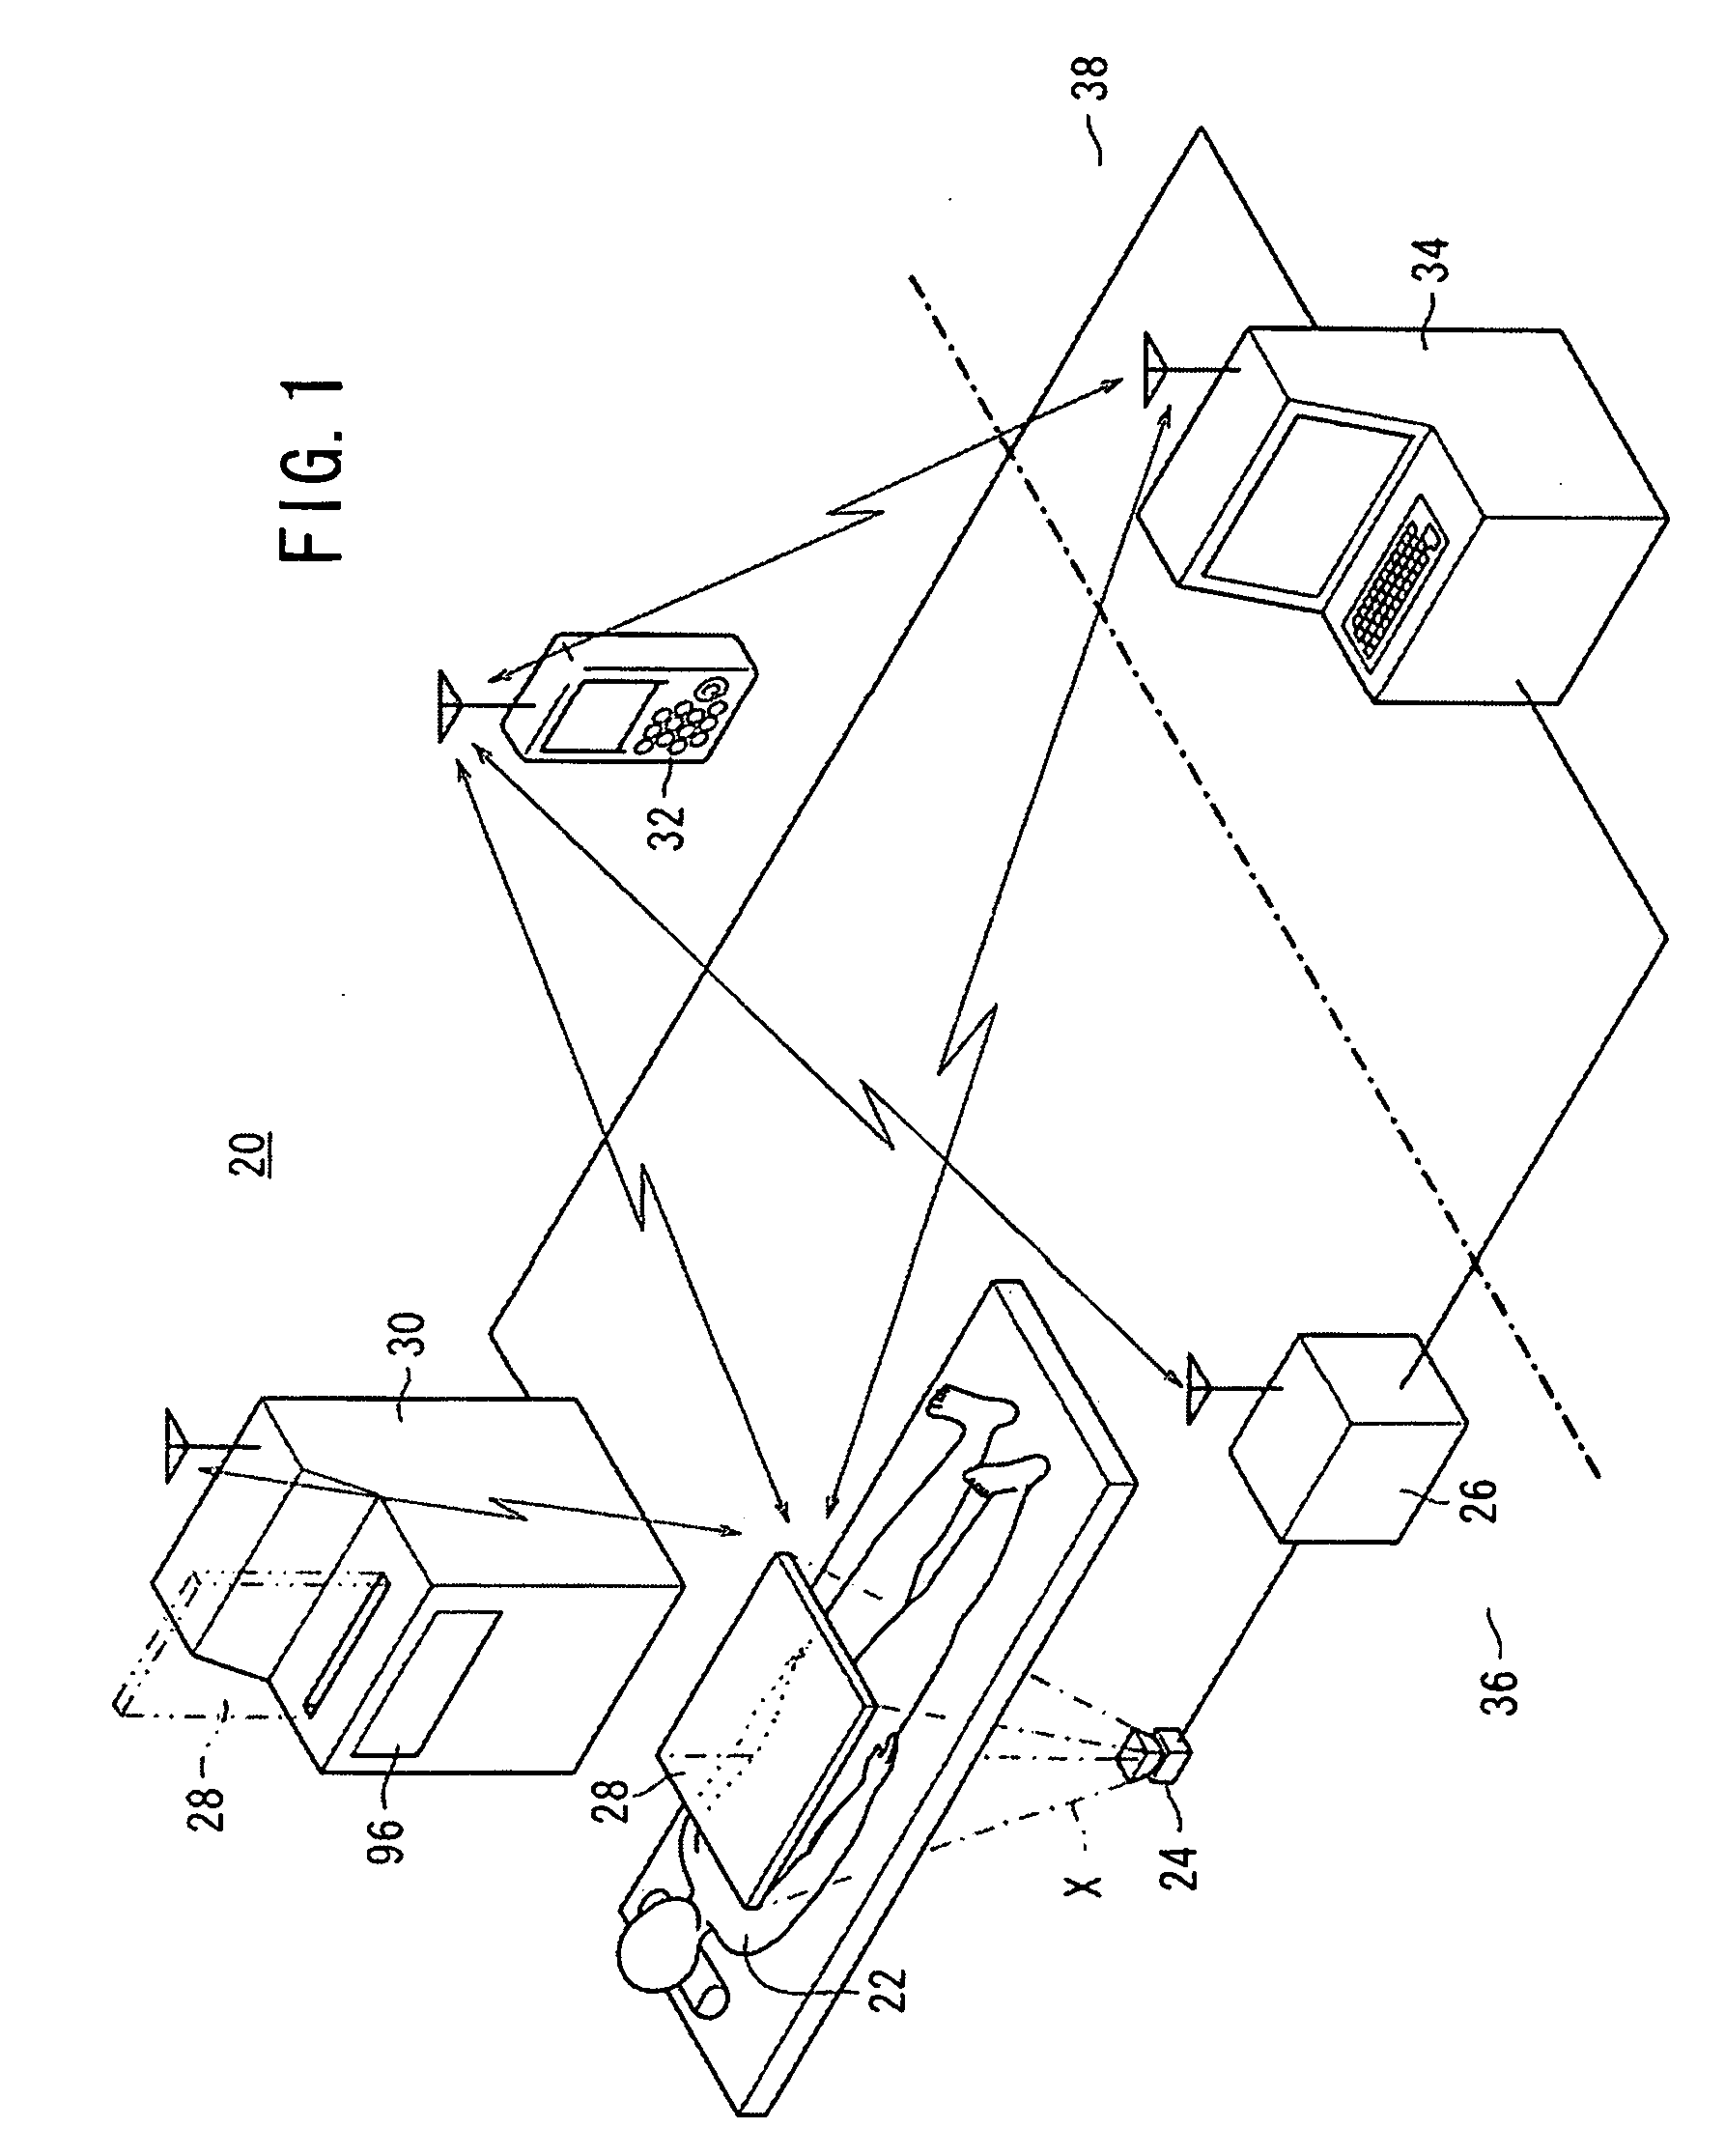 Radiation detection apparatus and radiation image capturing system